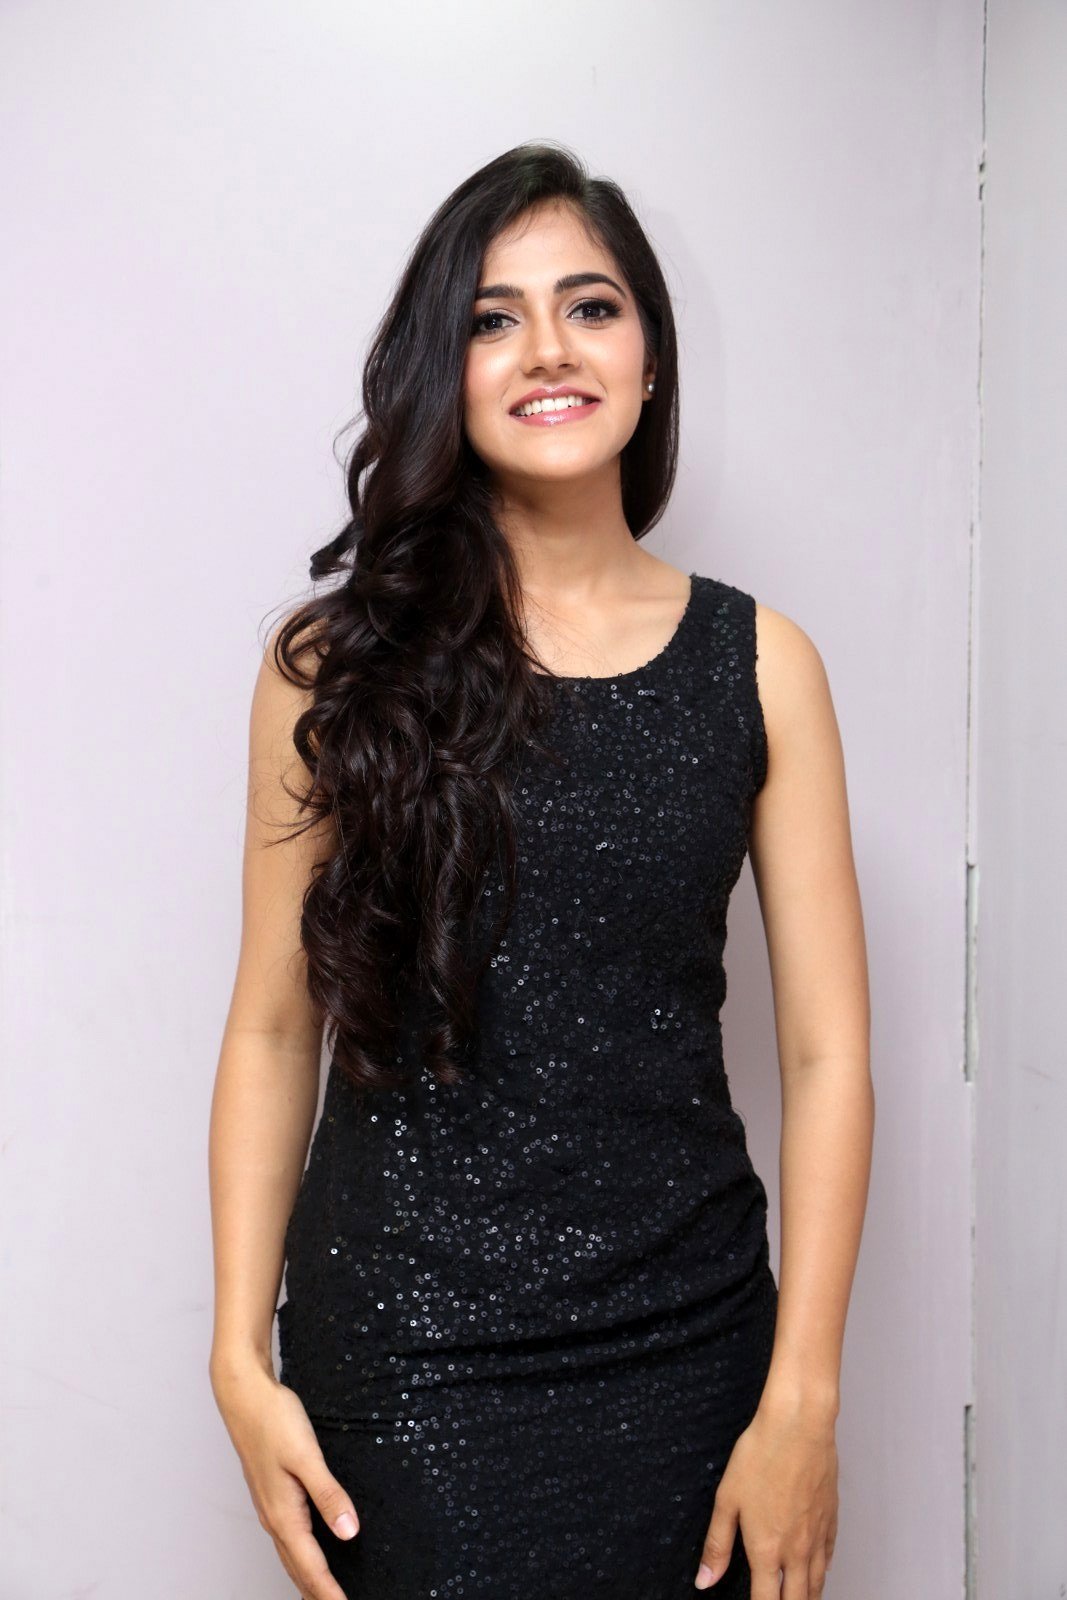 Telugu Actress Simran at Fbb Miss India Auditions Event Photos | Picture 1473474